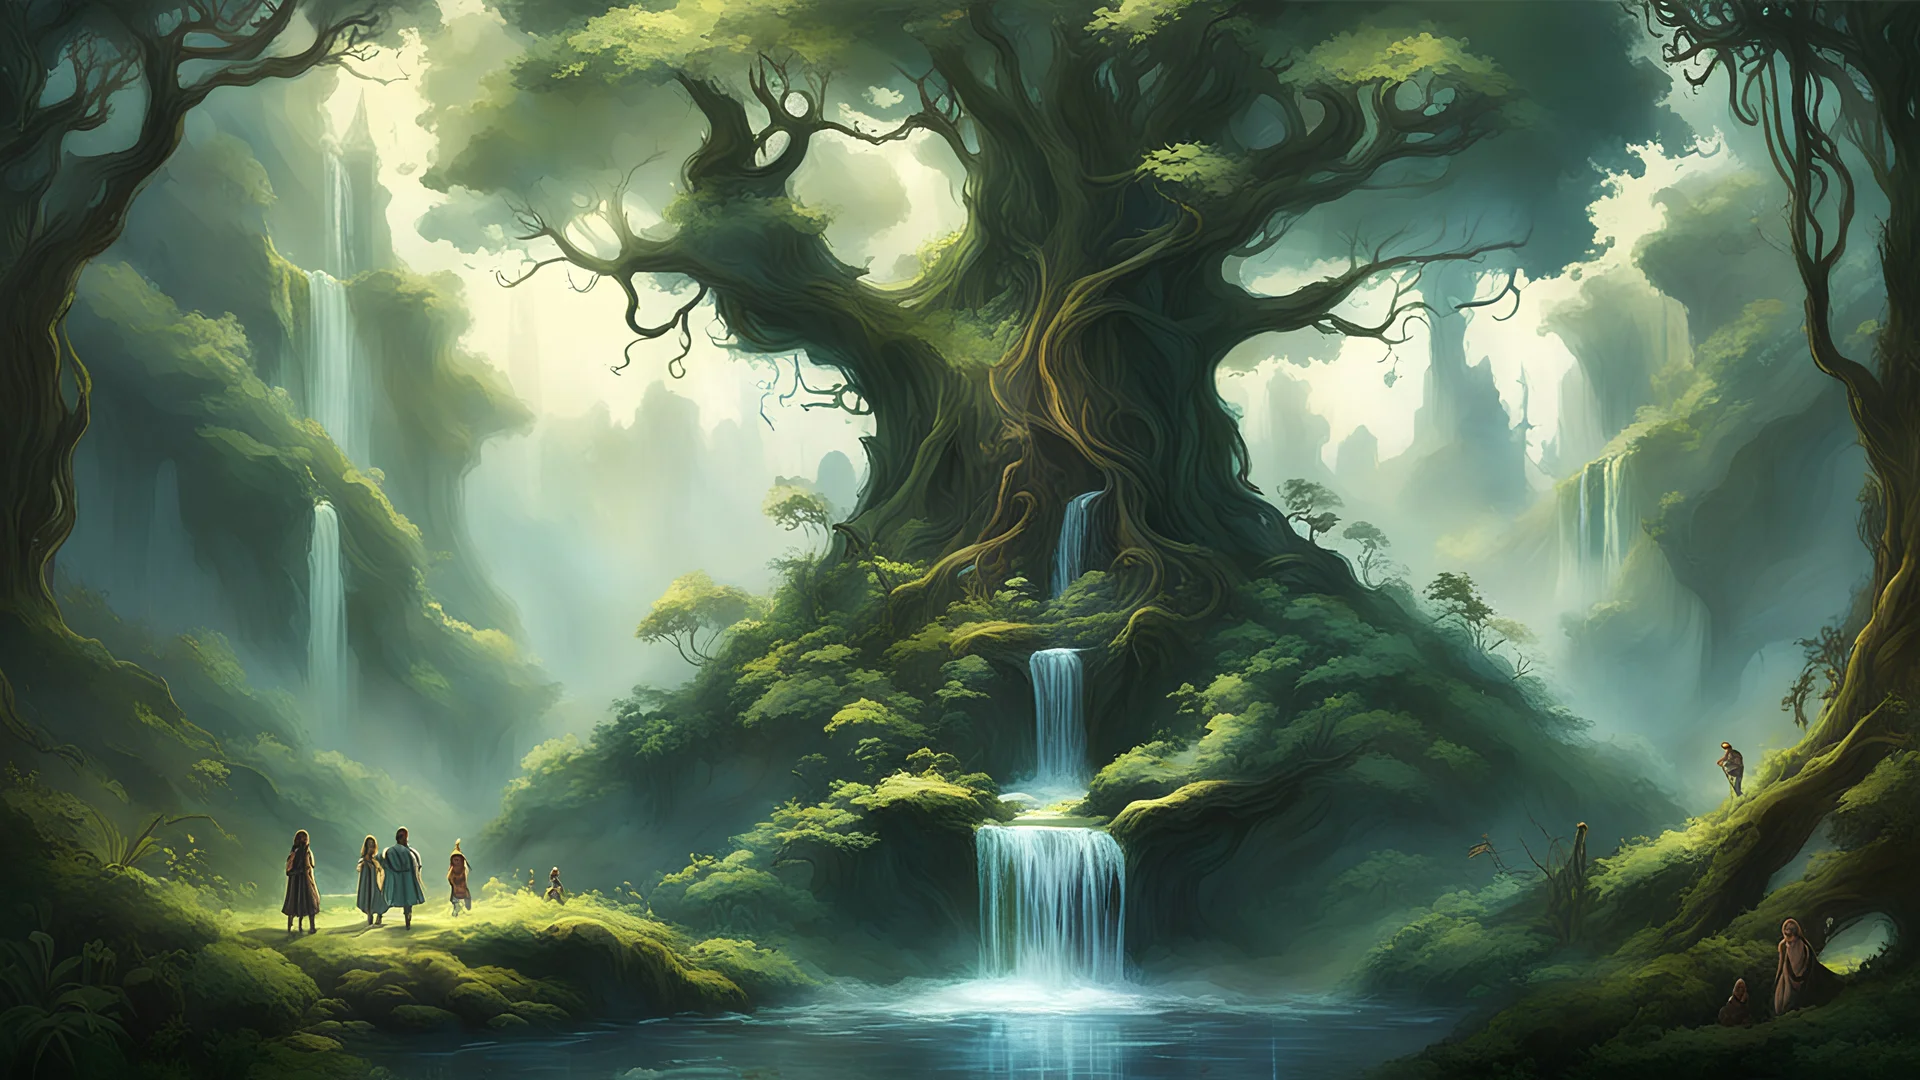 Digital art in HD depicts the realm of Tir na nÓg in Ireland, with a dense, ancient forest surrounding a tranquil fountain shimmering with iridescent hues. Ethereal faeries dance amidst the lush greenery, inviting players on a journey filled with wonder and adventure.